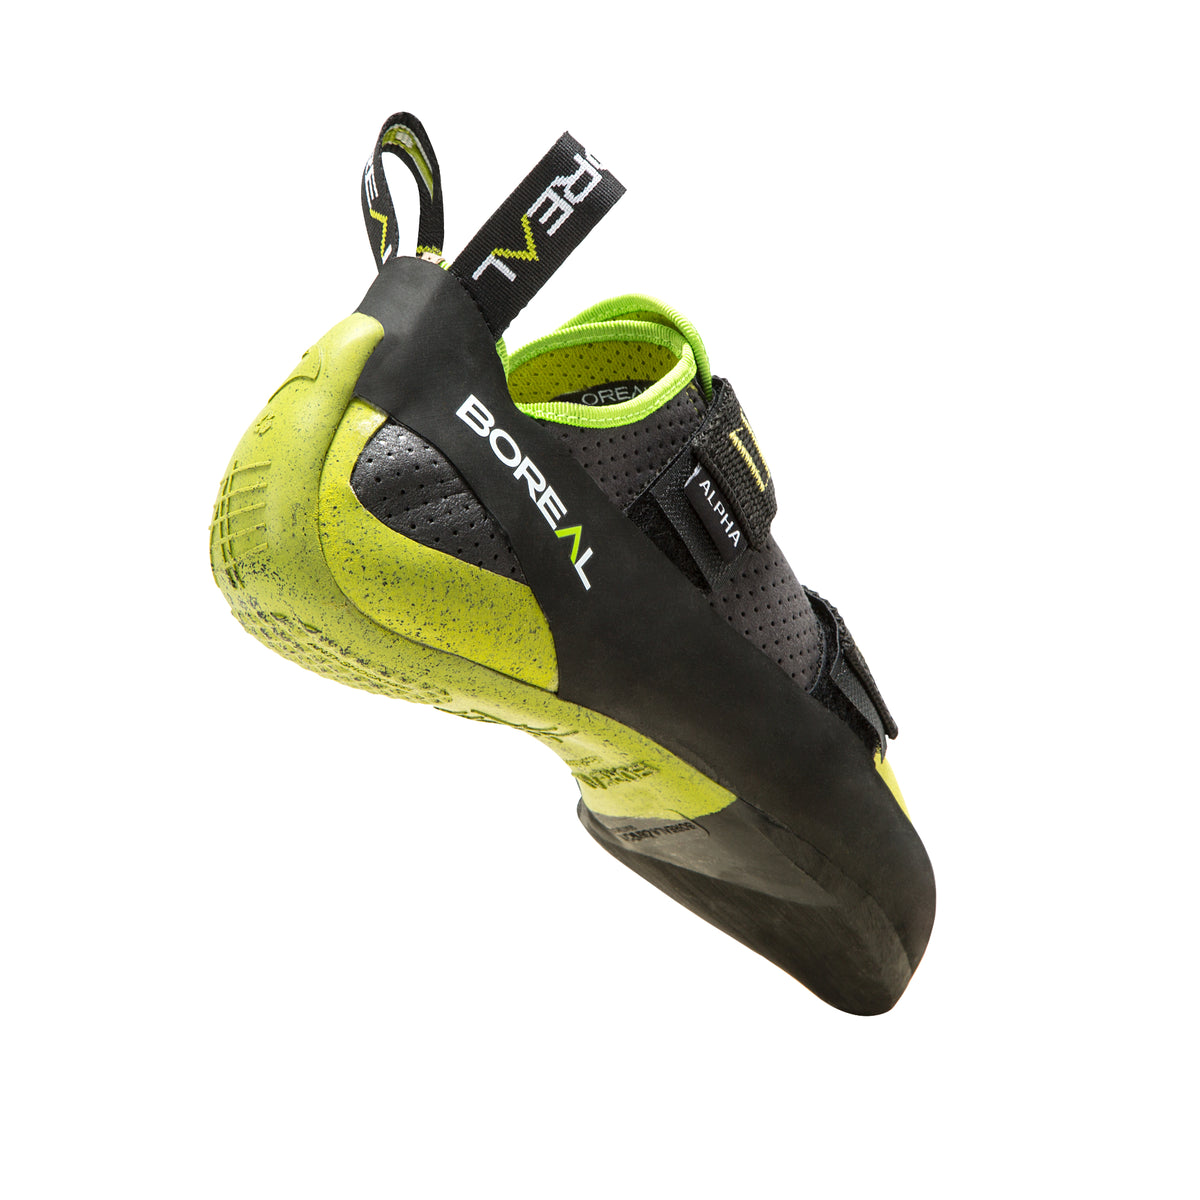 Boreal Alpha VC in green and black showing heel